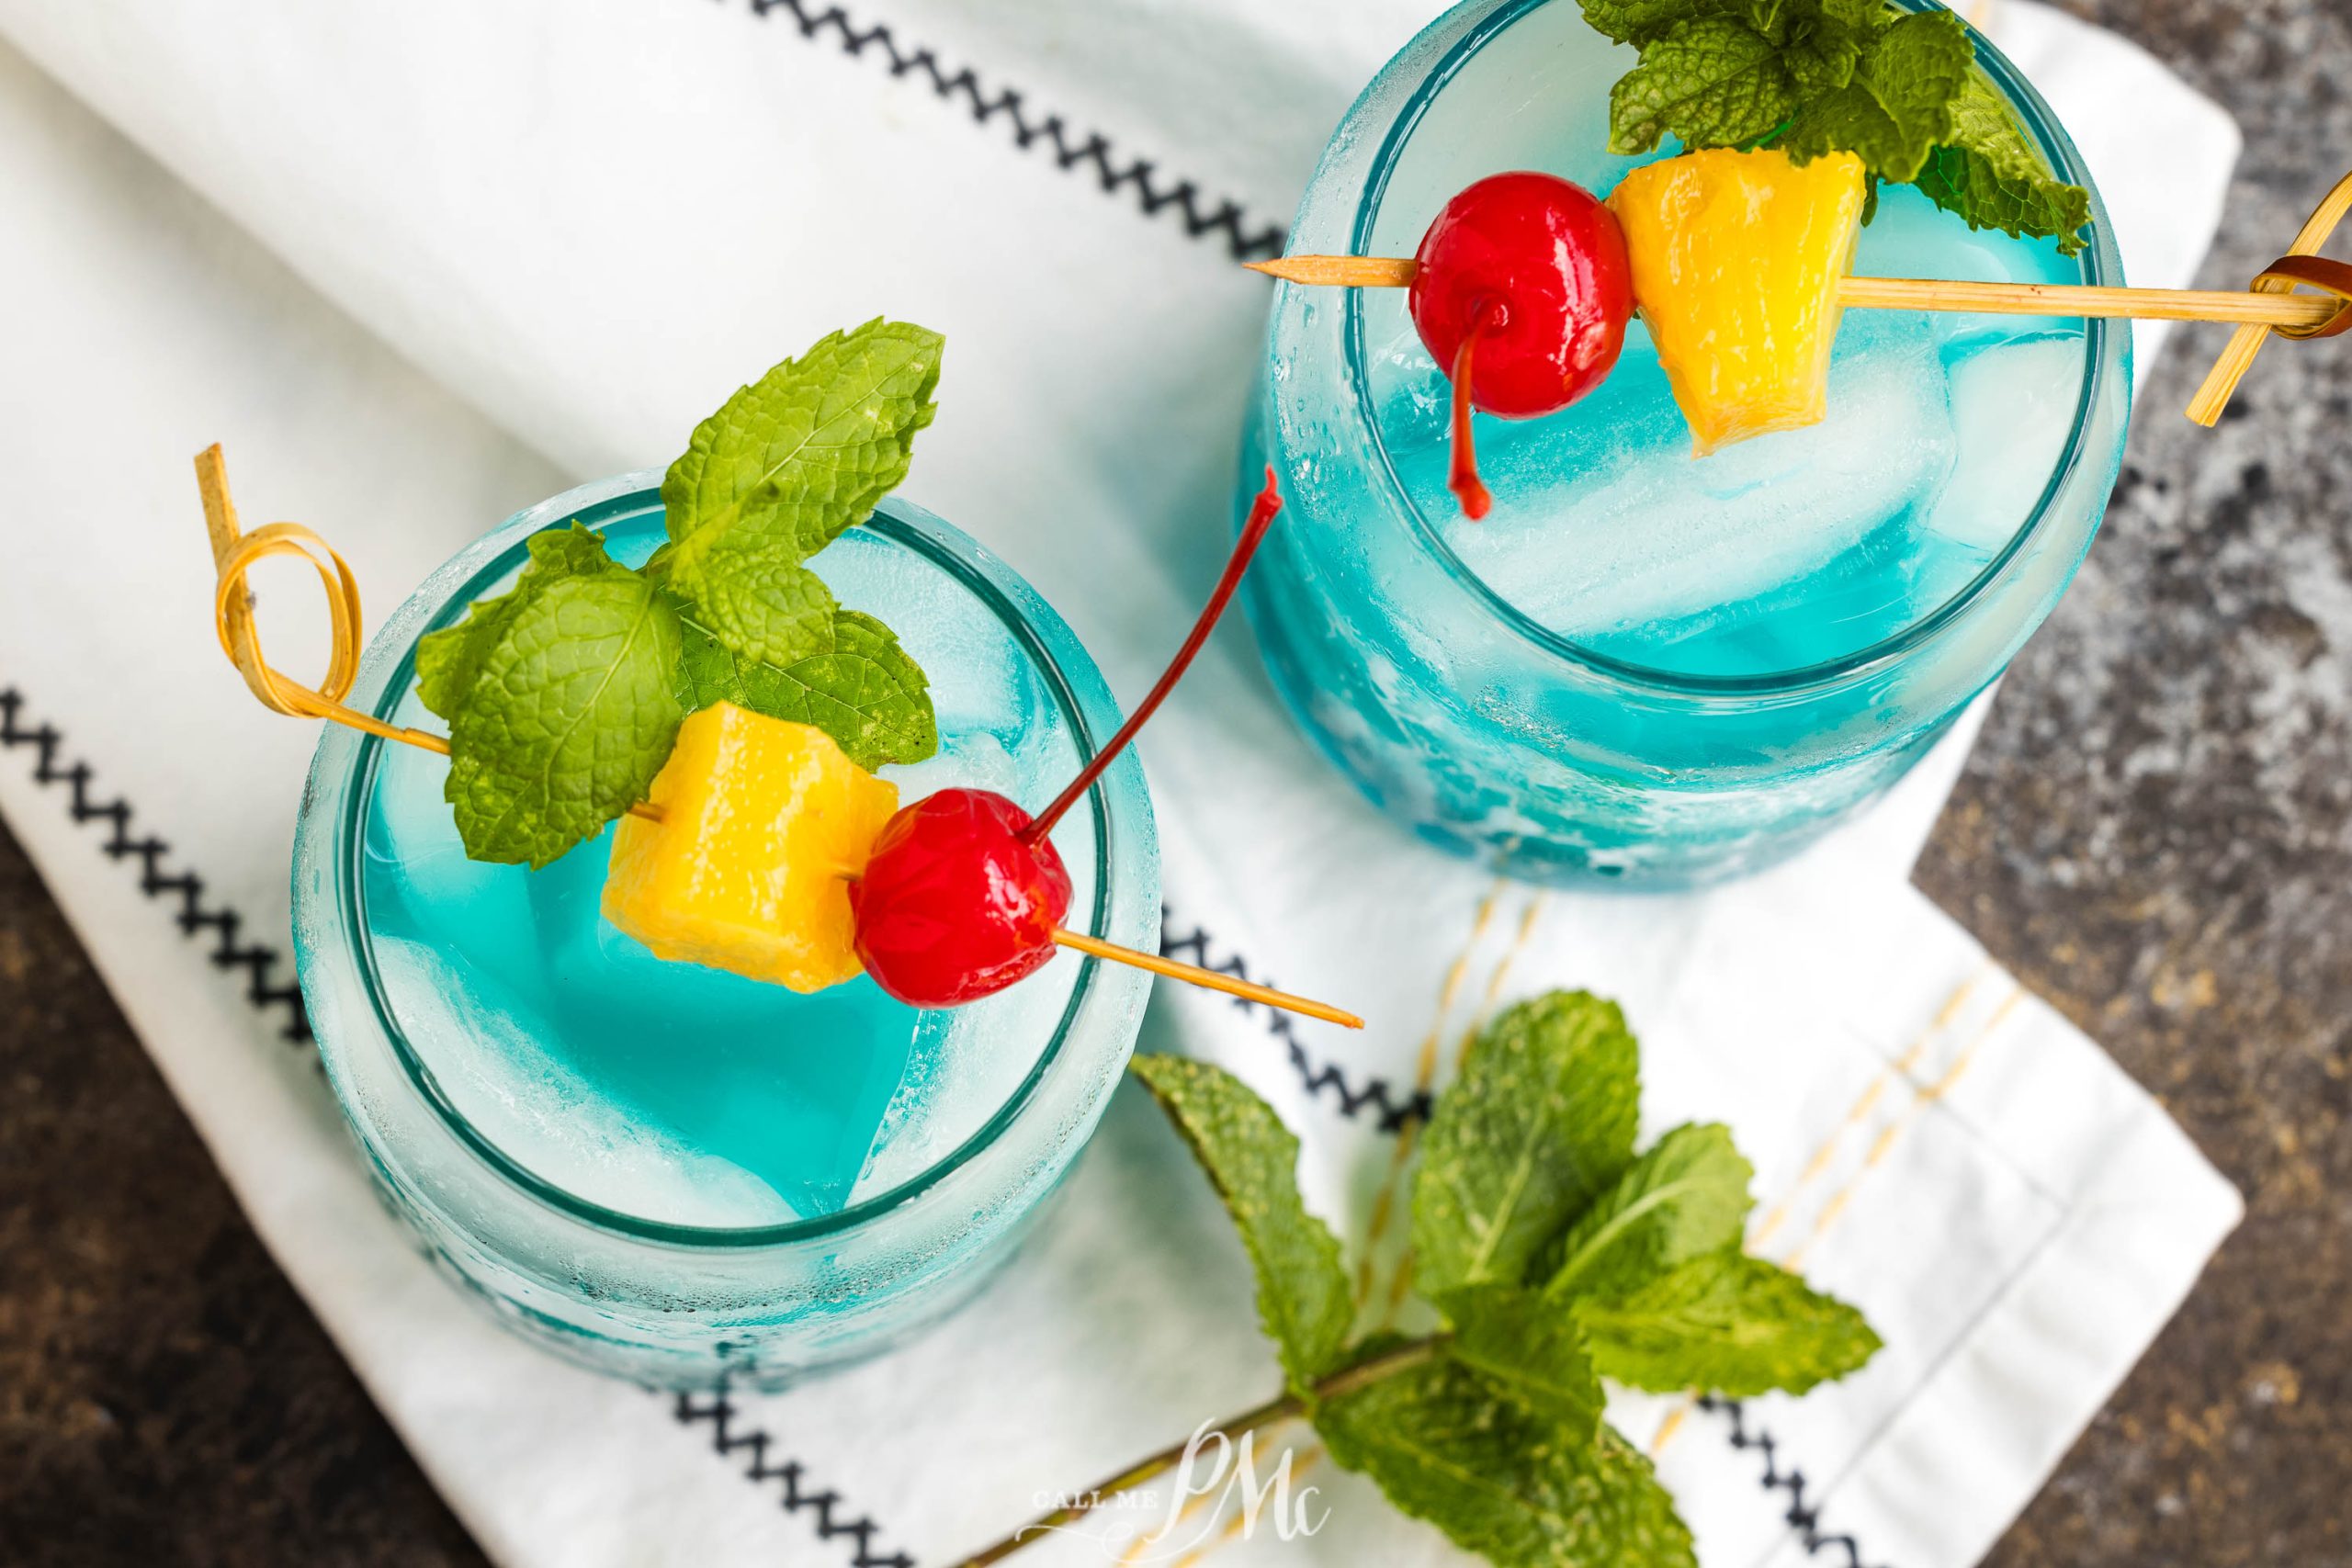 Two drinks with ice, garnished with skewers of a red cherry, yellow pineapple chunk, and fresh mint, placed on a white cloth with black stitching. Mint leaves are scattered nearby.